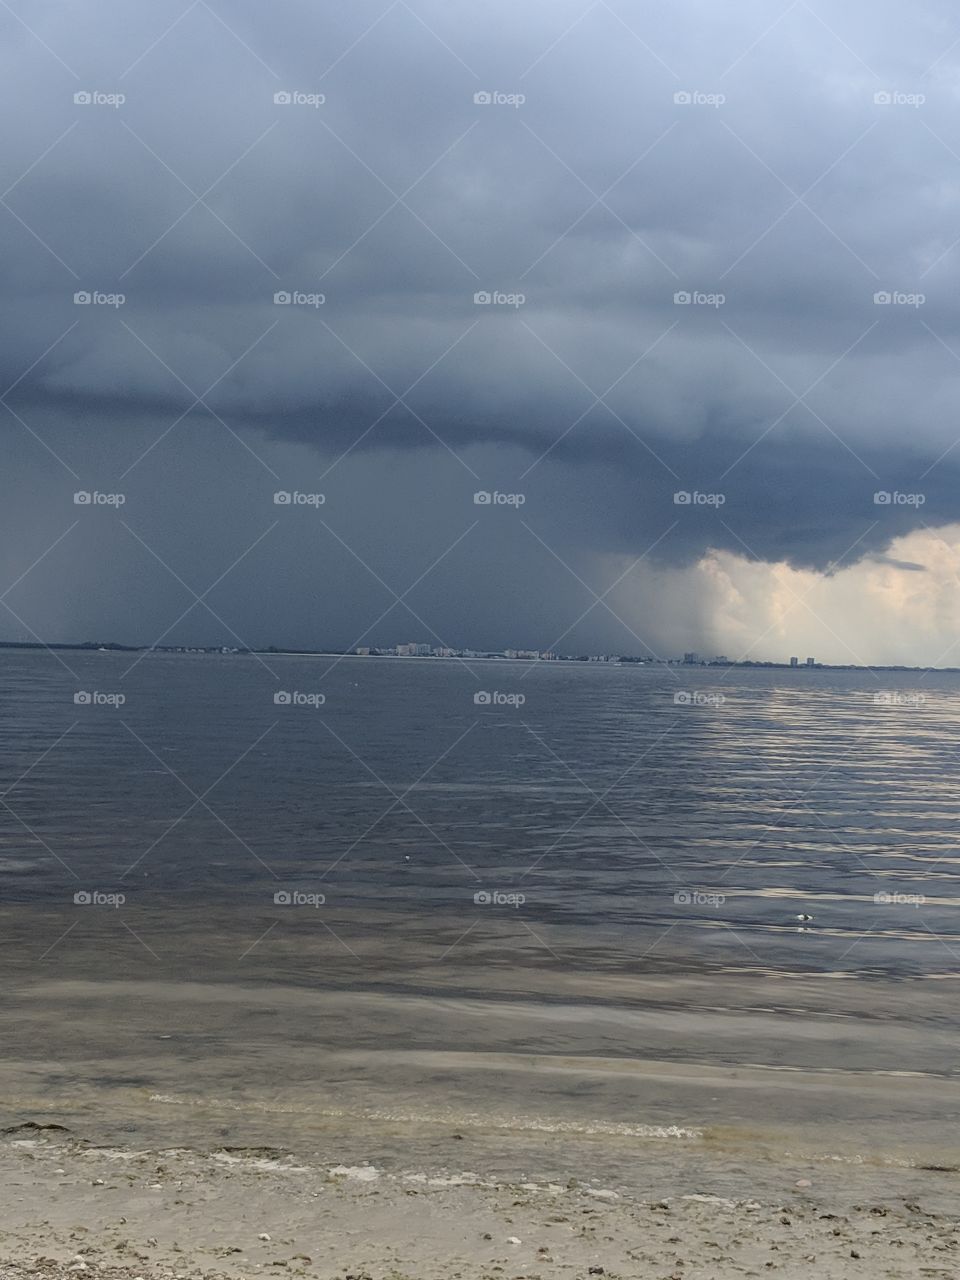 storm rolling over Fort Myers, FL as seen from Sanibel island causeway.